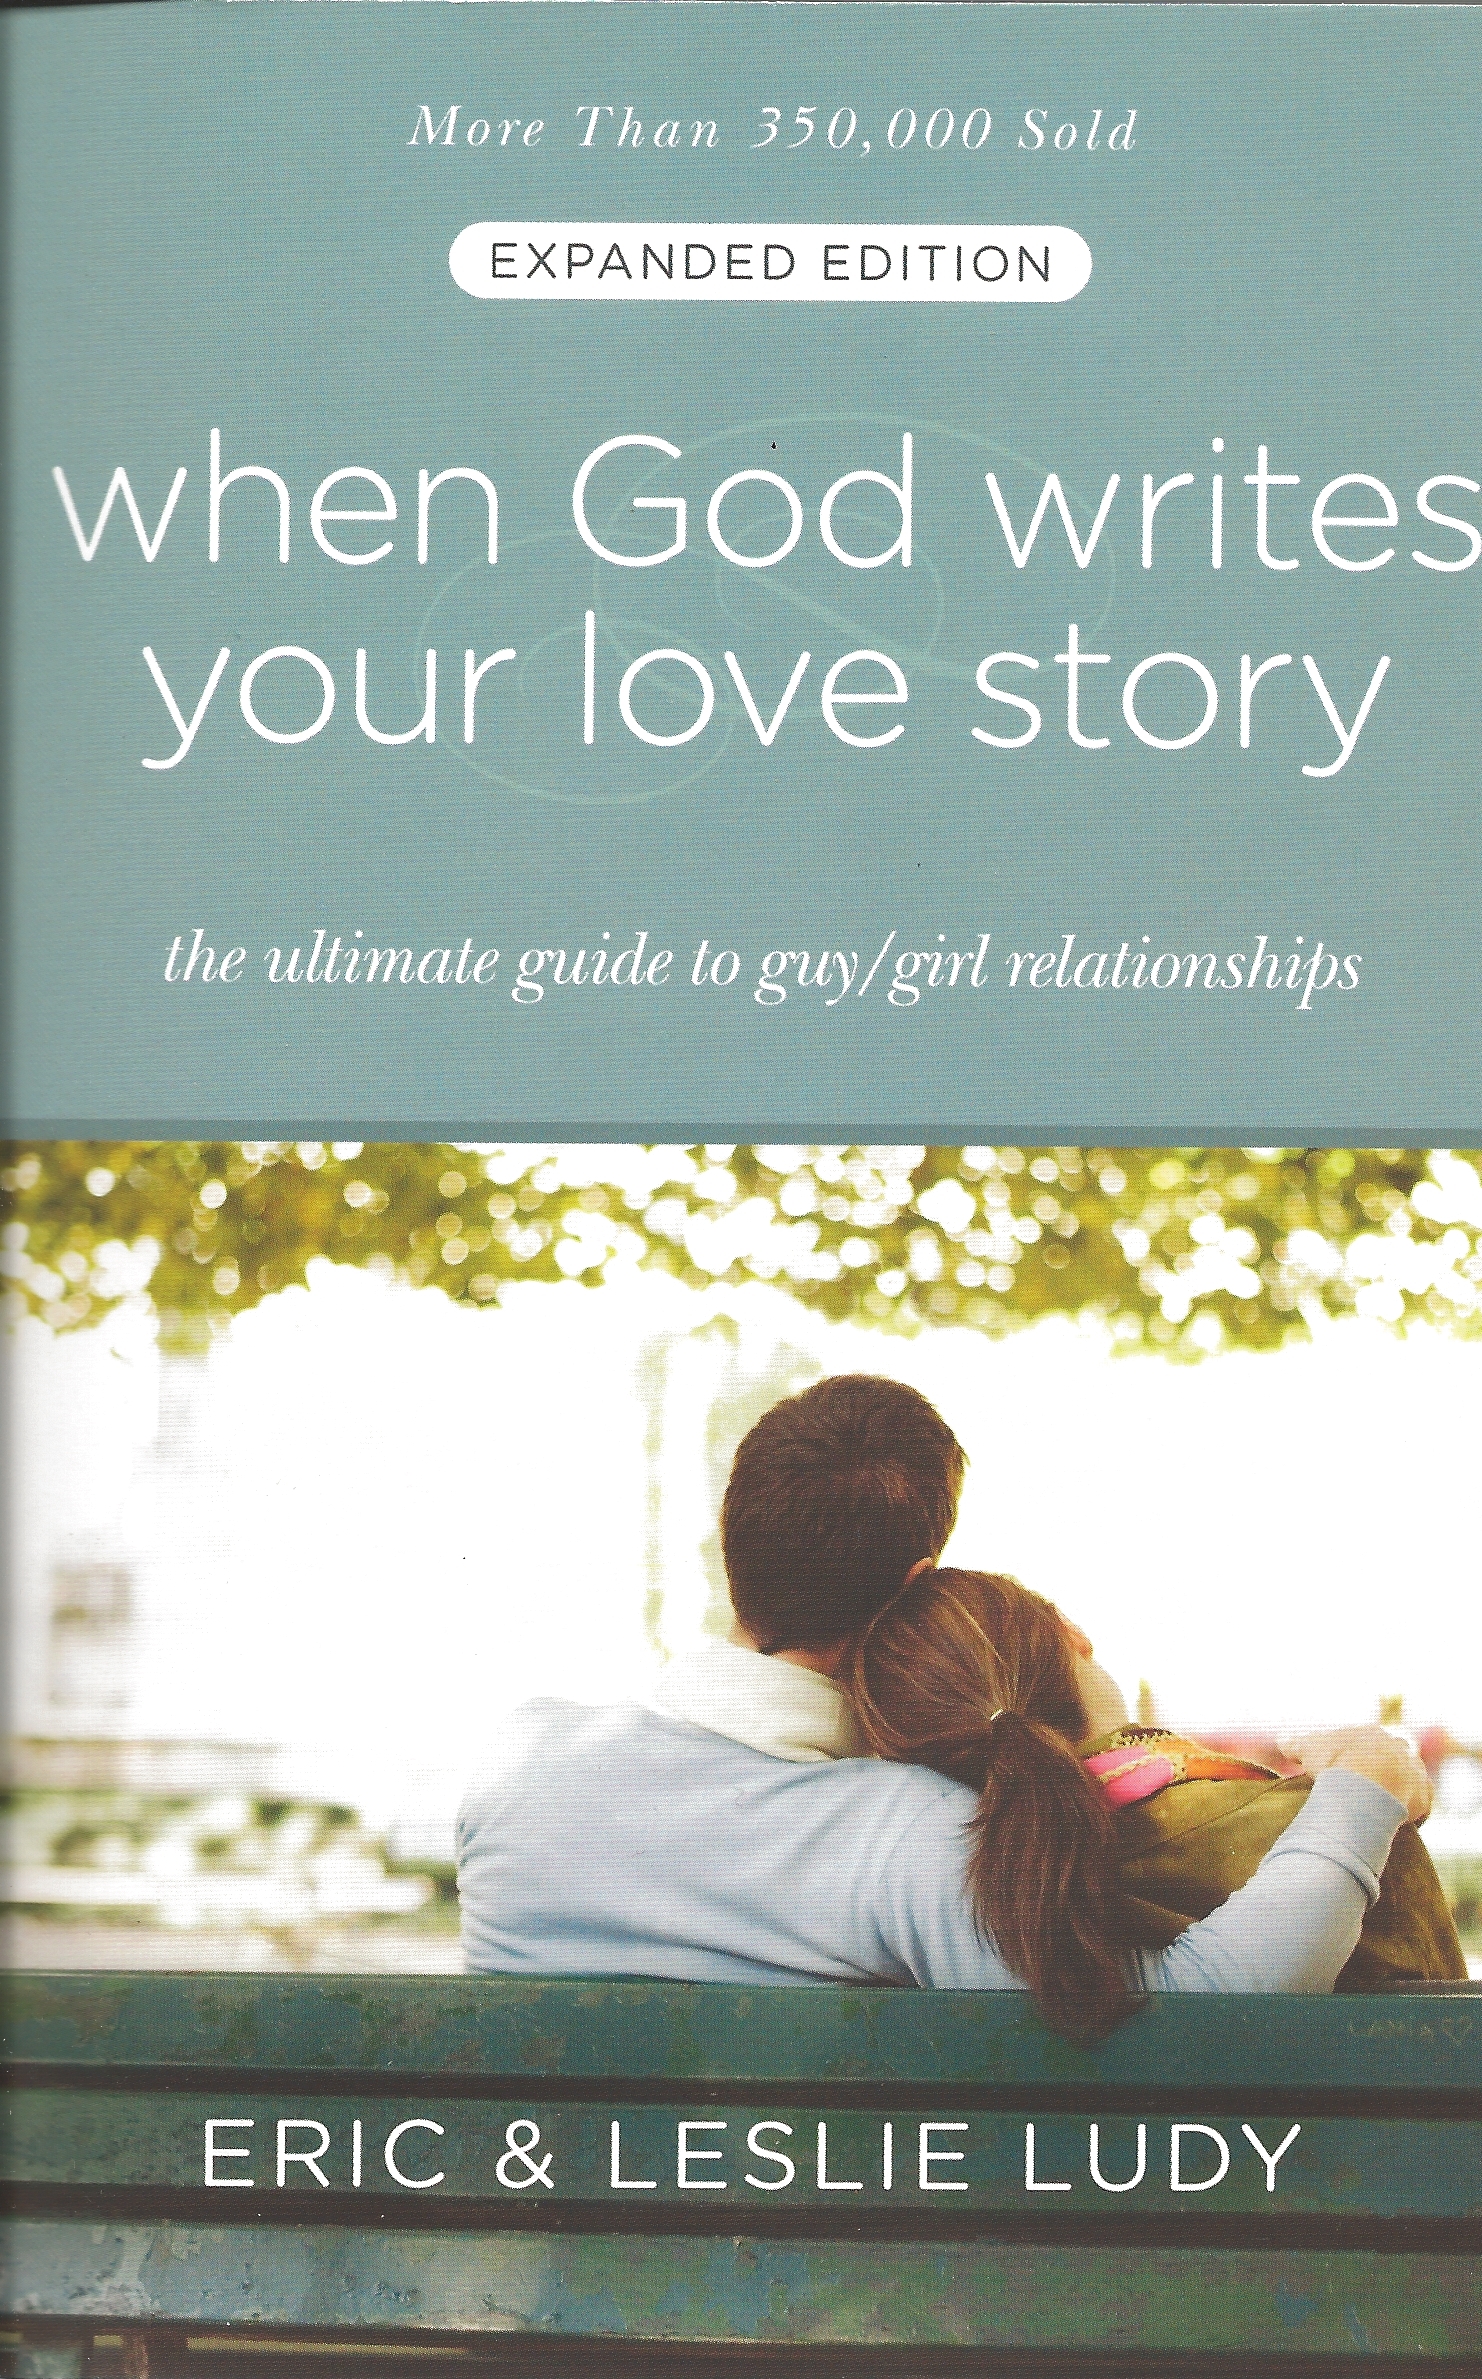 WHEN GOD WRITES YOUR LOVE STORY Eric & Leslie Ludy